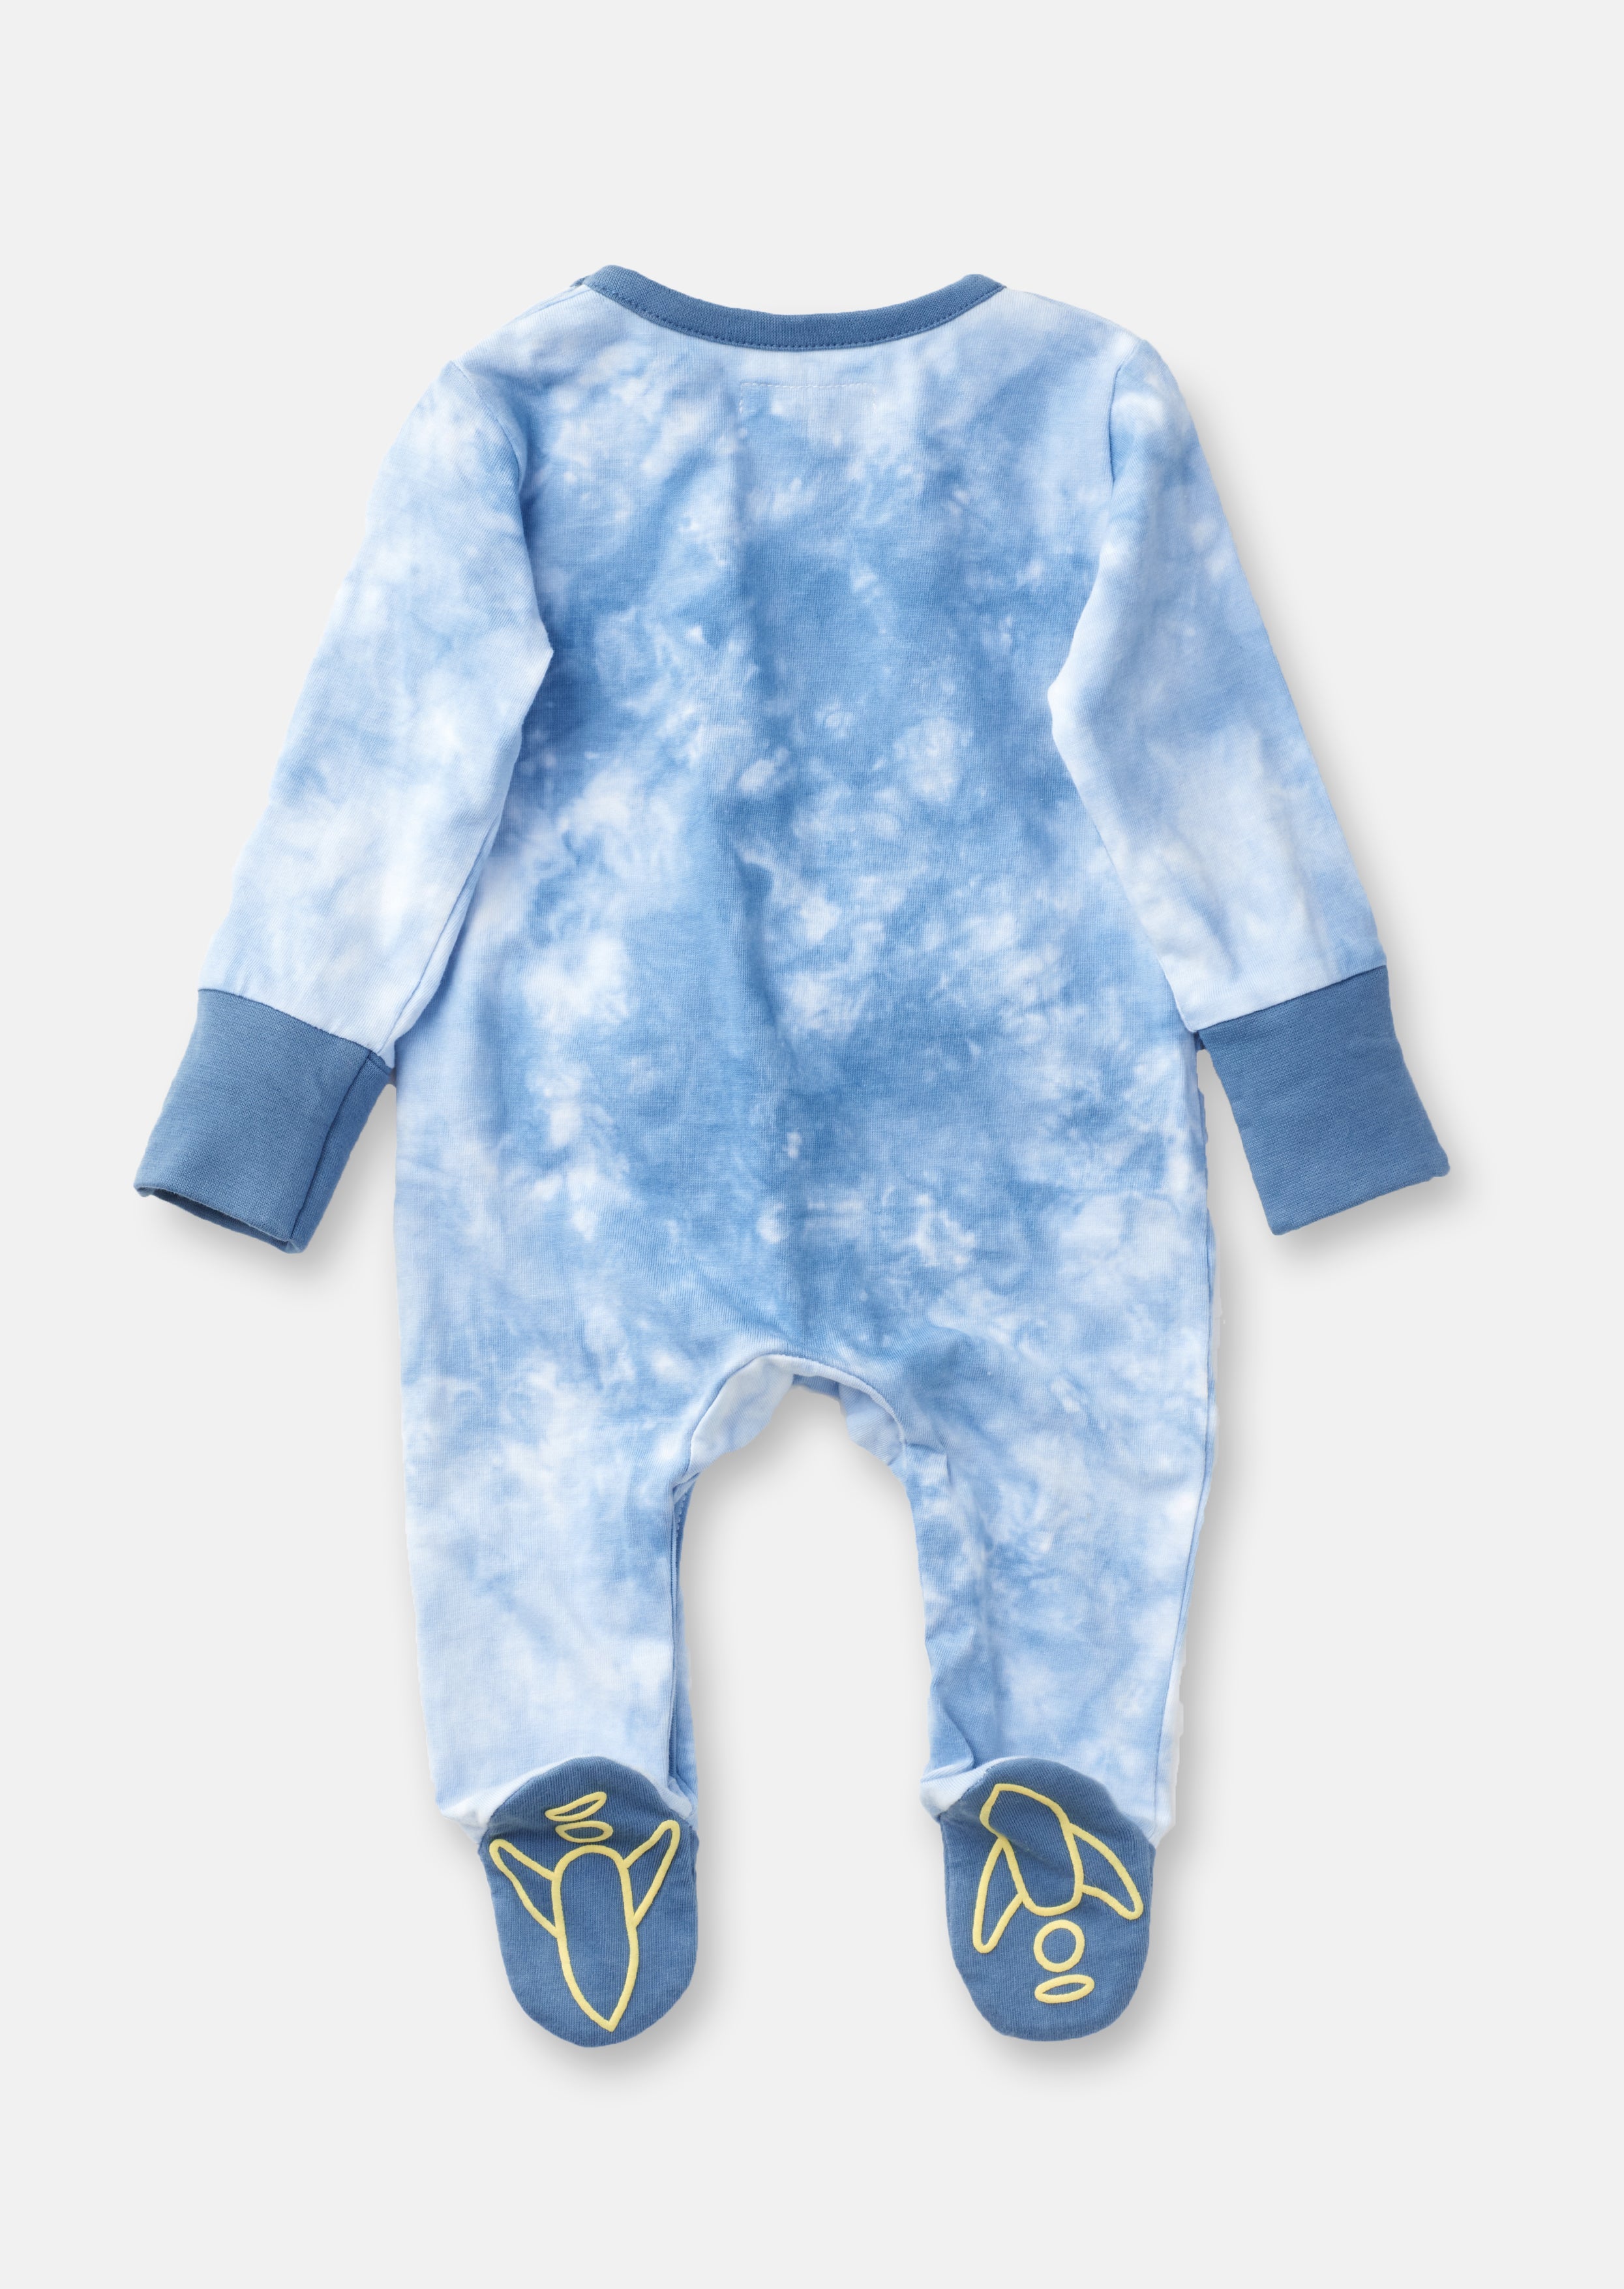 Baby Boy Blue Tie Dye Printed All in One Sleepsuit with Hat